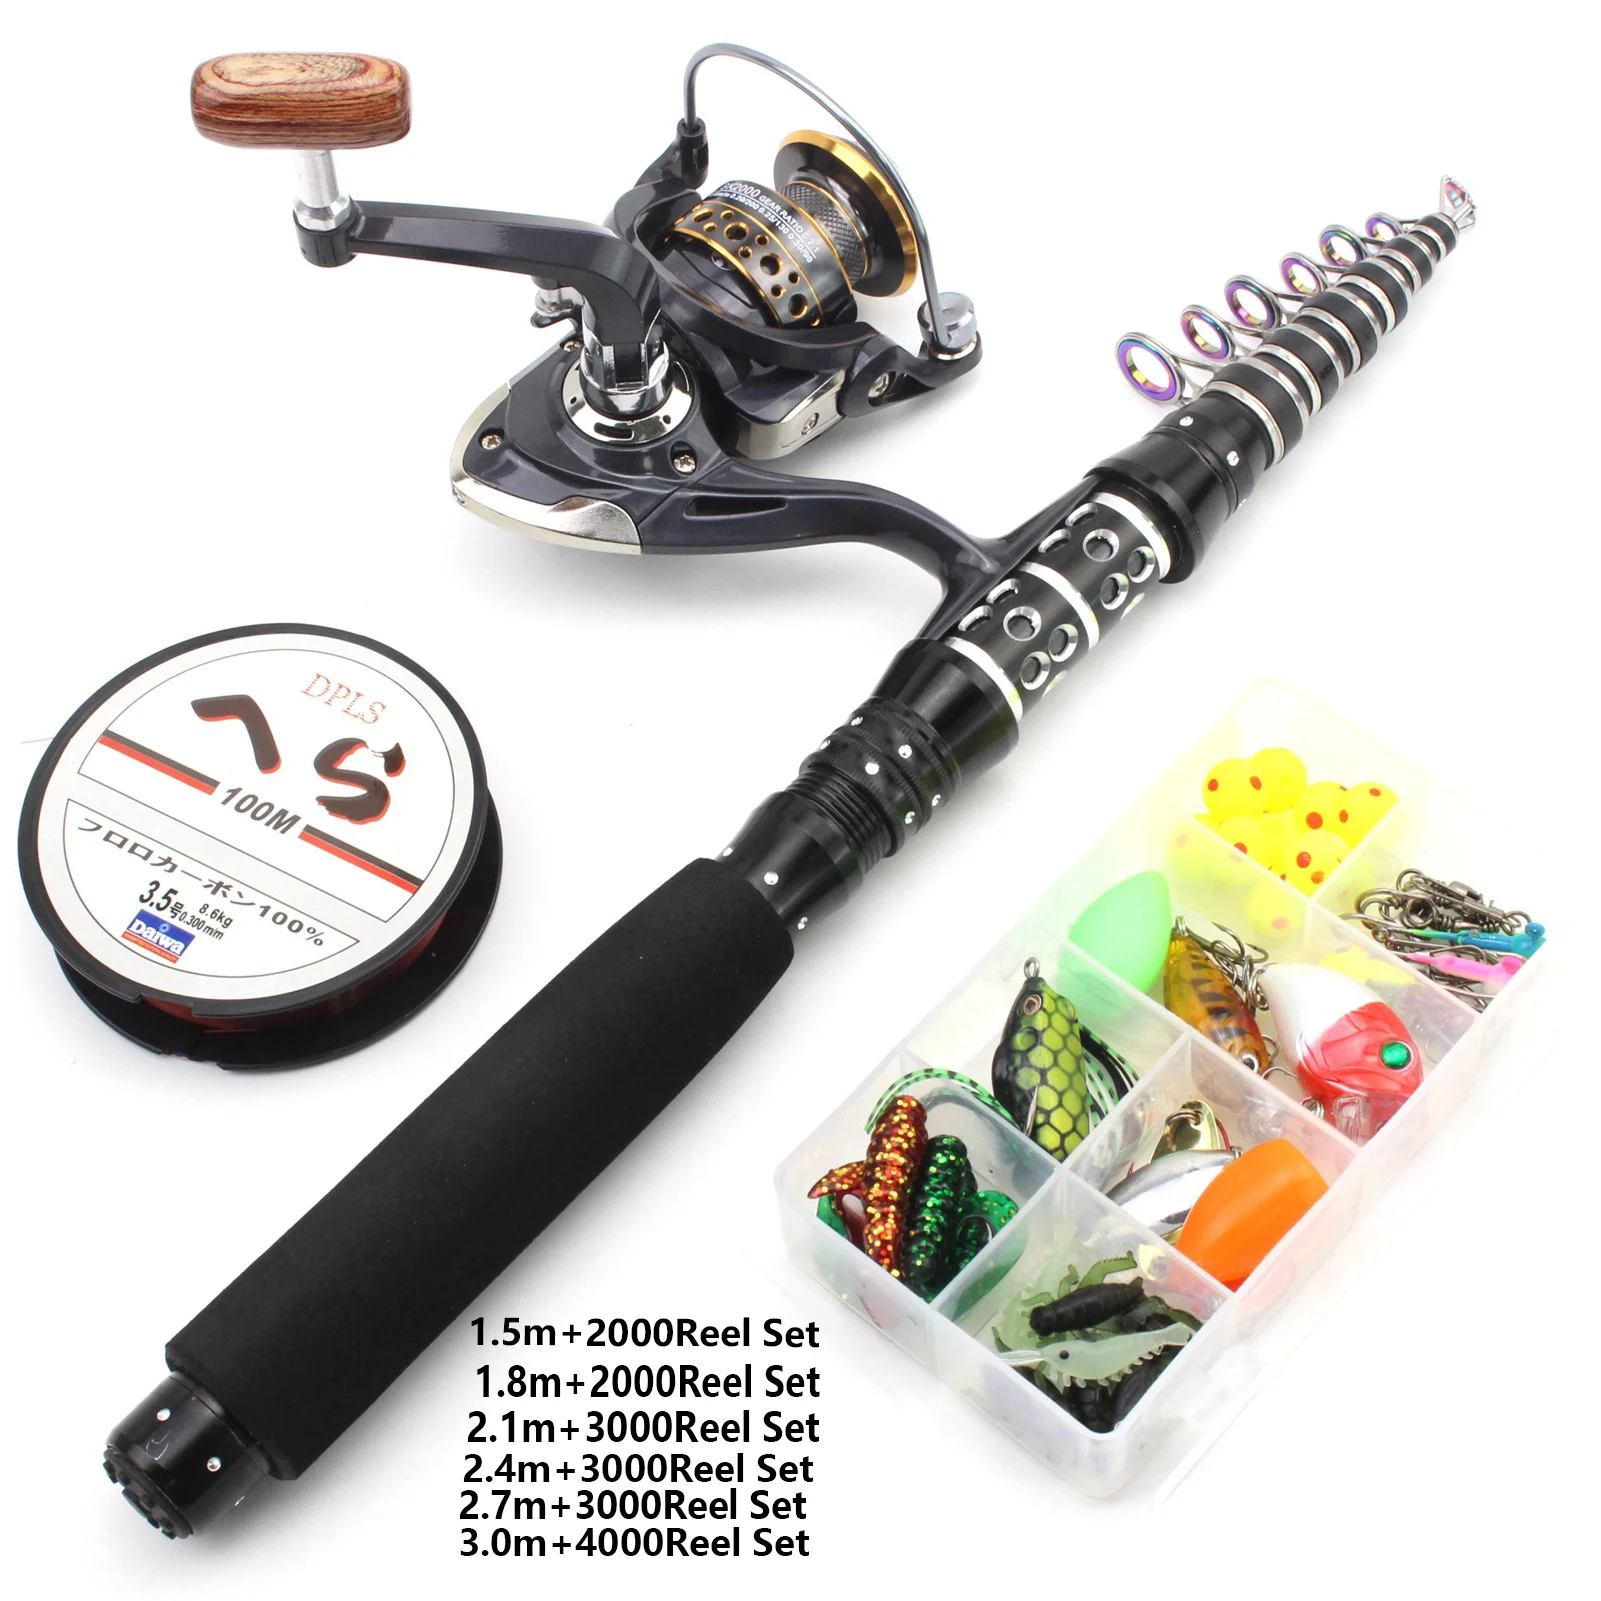 

High Quality Telescopic Fishing Rod 1.5m-3.0m Carbon Fiber Pole Lure Weight 10g-50g Spinning Casting Fishing Equipment Tackle